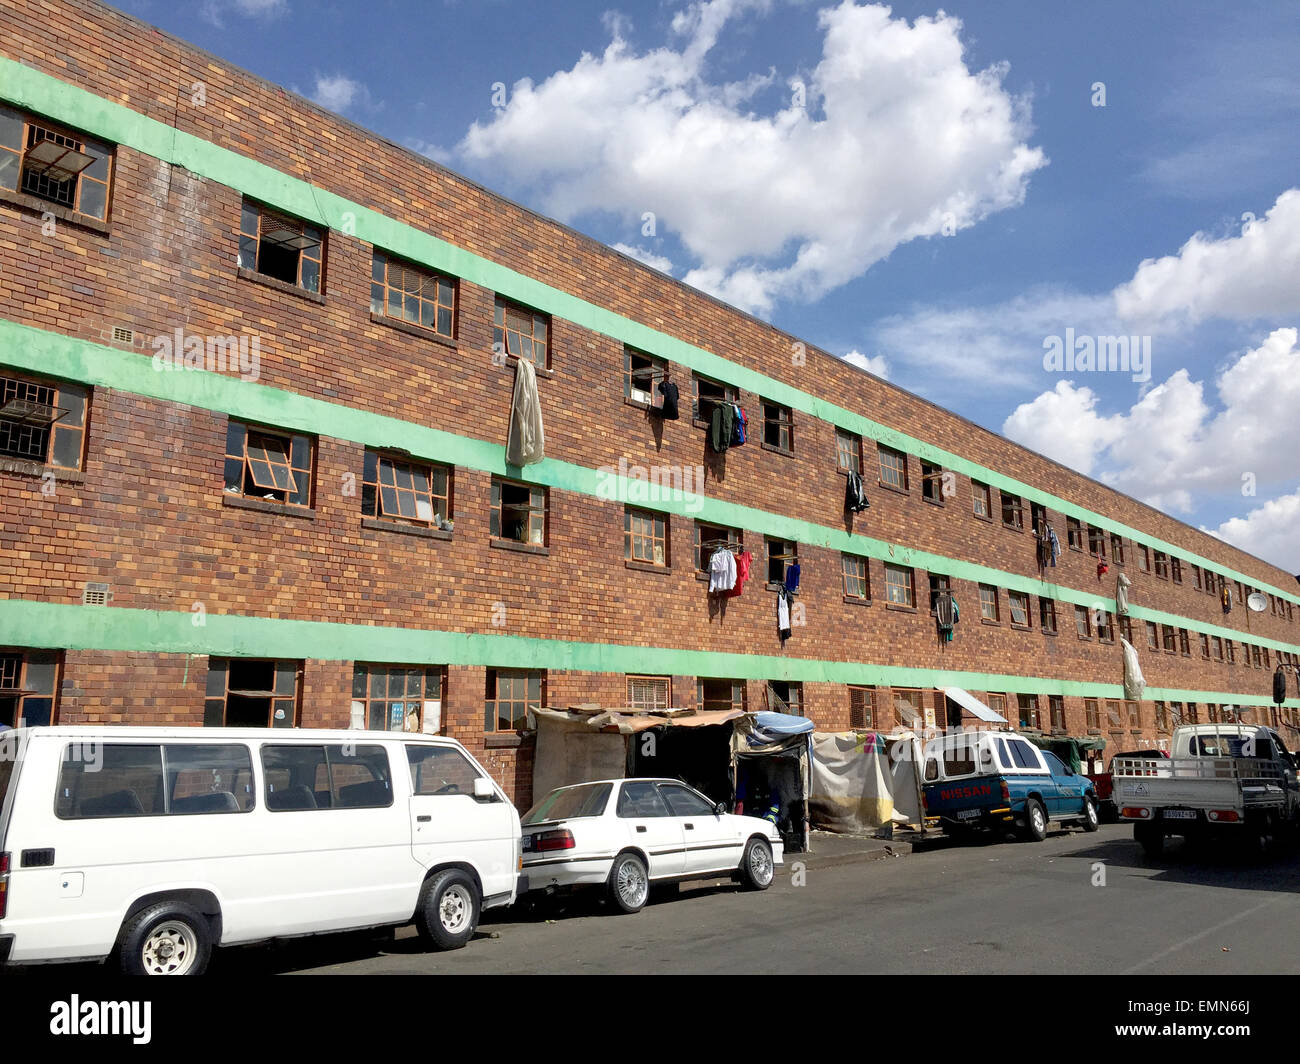 Johannesburg, South Africa. 21st Apr, 2015. Cars parked in front of the Jeppestown workers' home in the center of Johannesburg, South Africa, 21 April 2015. The 1,500-resident home, originally founded for mine workers, was one of the starting points for the xenophobic riots of the past weeks. Dozens of immigrant-owned shops were looted. Photo: JUERGEN BAETZ/dpa/Alamy Live News Stock Photo